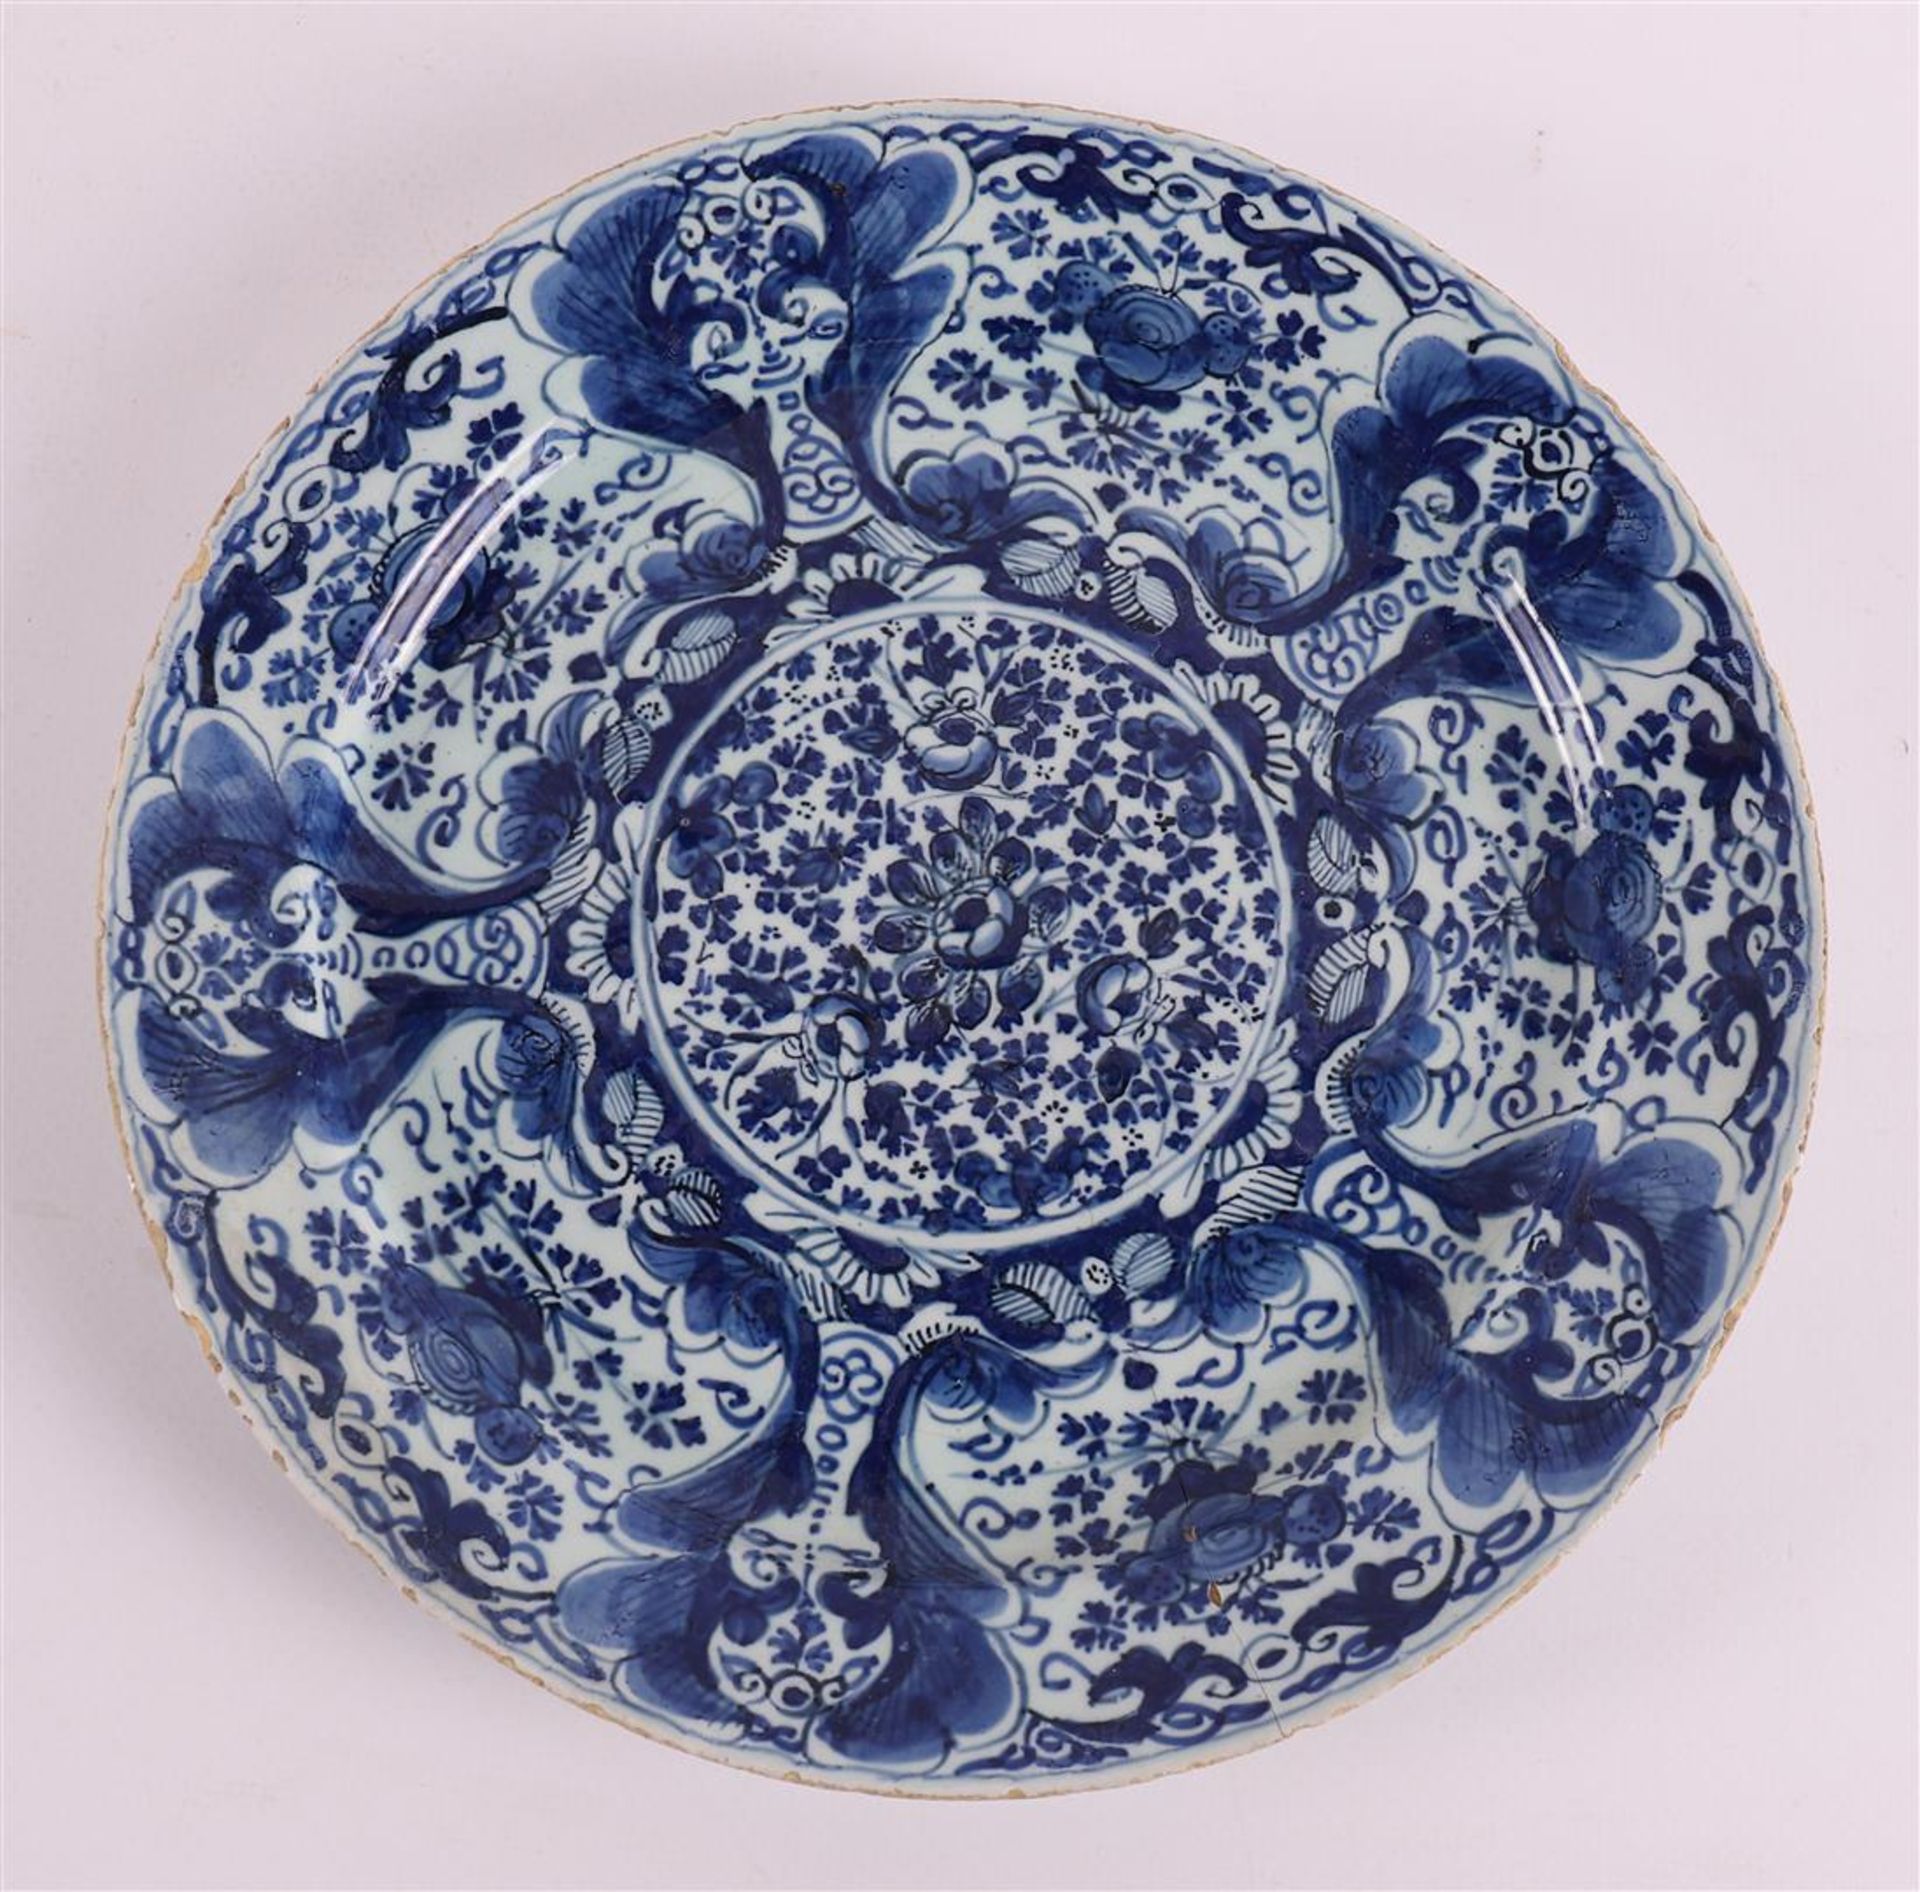 A blue/white Delft earthenware pancake plate, 18th century. - Image 6 of 7